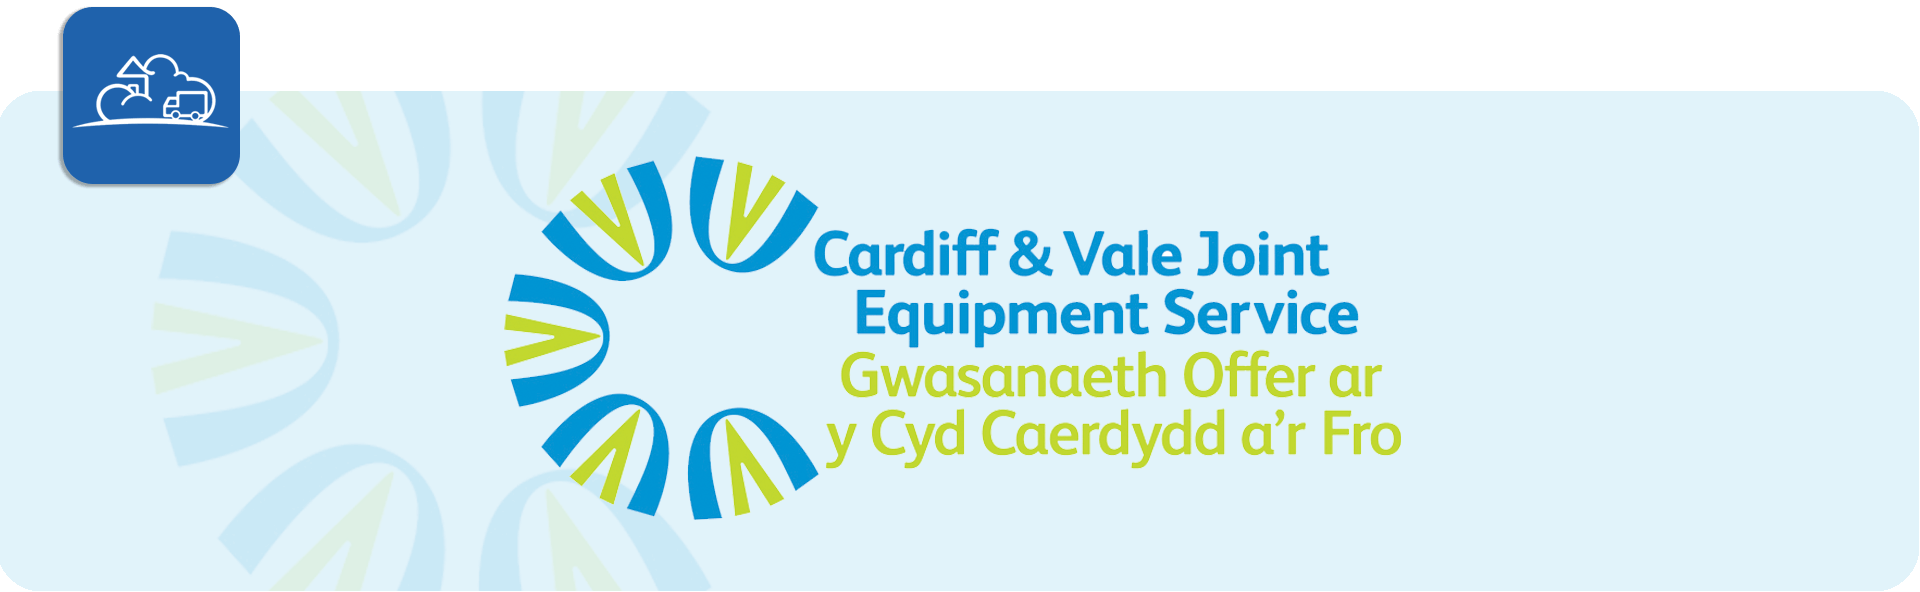 cardiff and vale joint equipment service logo